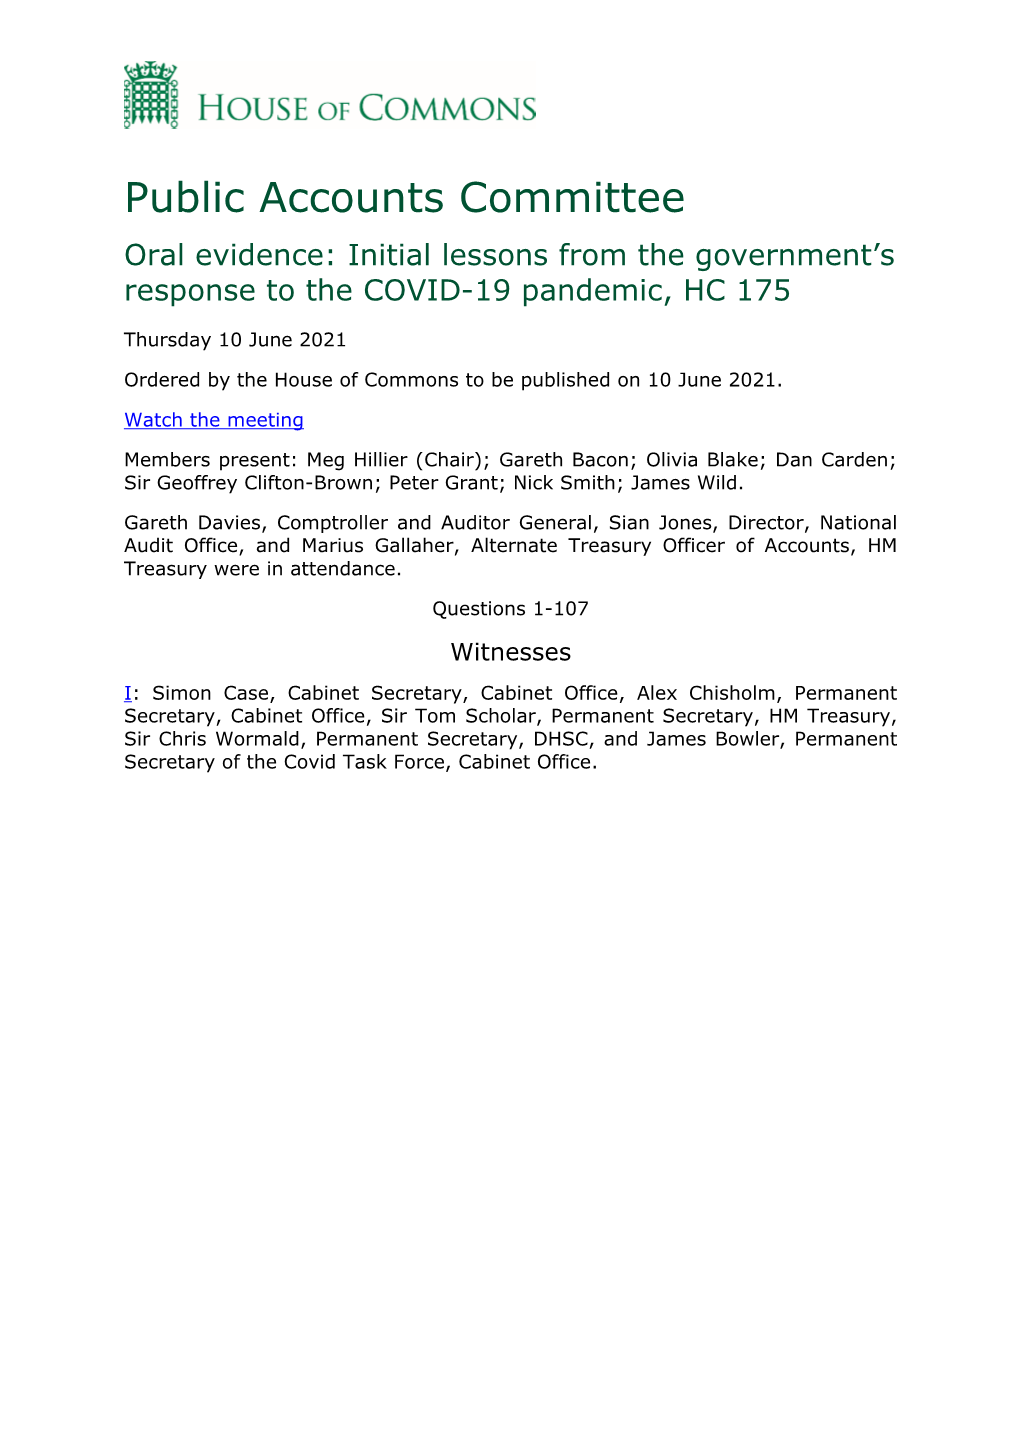 Public Accounts Committee Oral Evidence: Initial Lessons from the Government’S Response to the COVID-19 Pandemic, HC 175